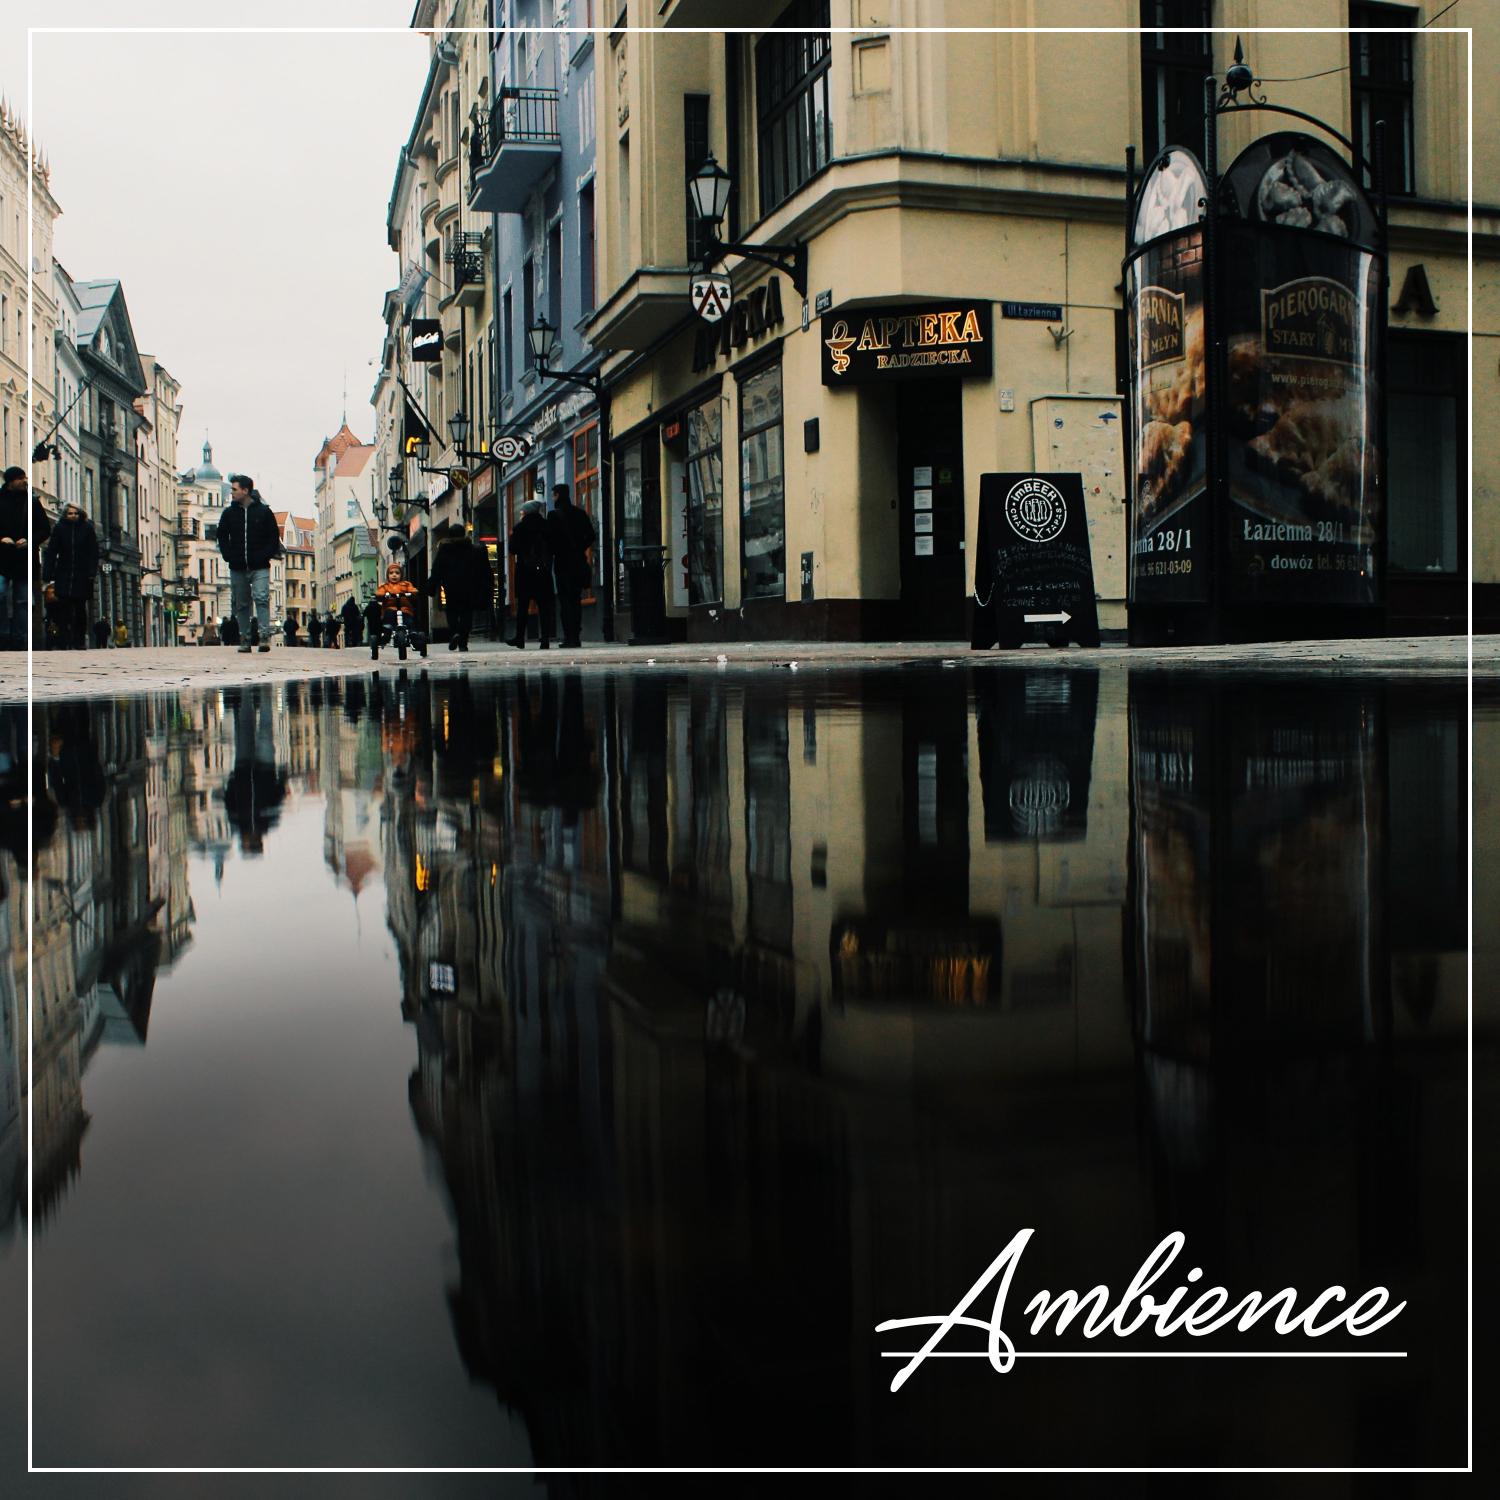 Ambience. Background Rain Sounds for Meditation Relaxation Sleep and Concentration